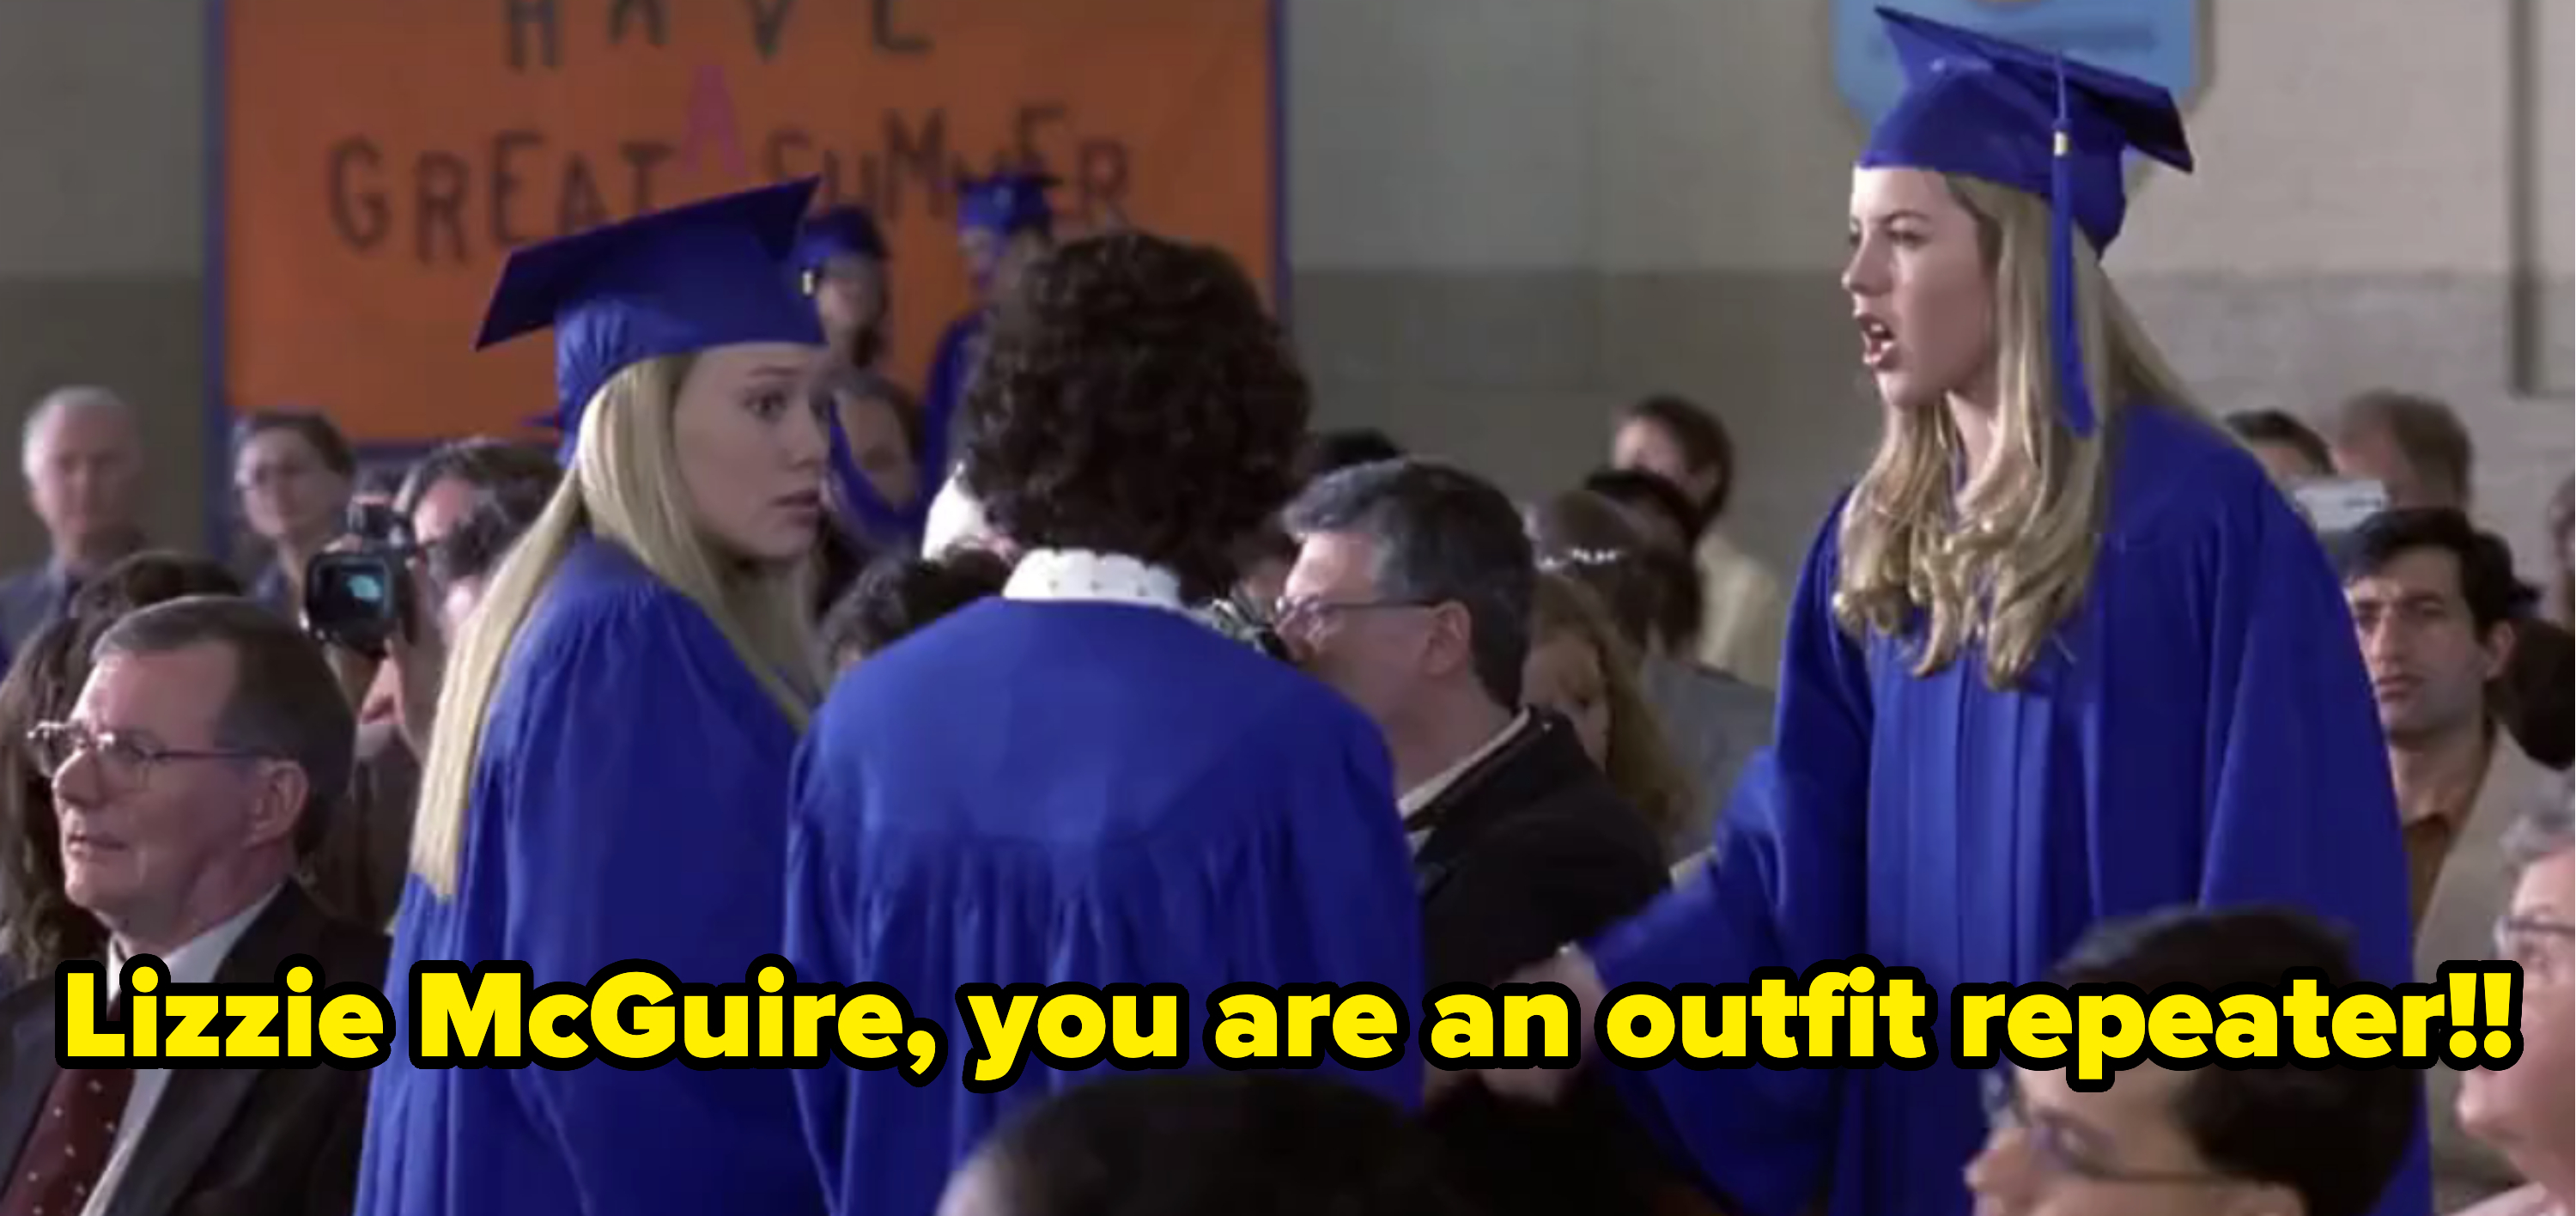 Kate from Lizzie McGuire saying &quot;you are an outfit repeater&quot;